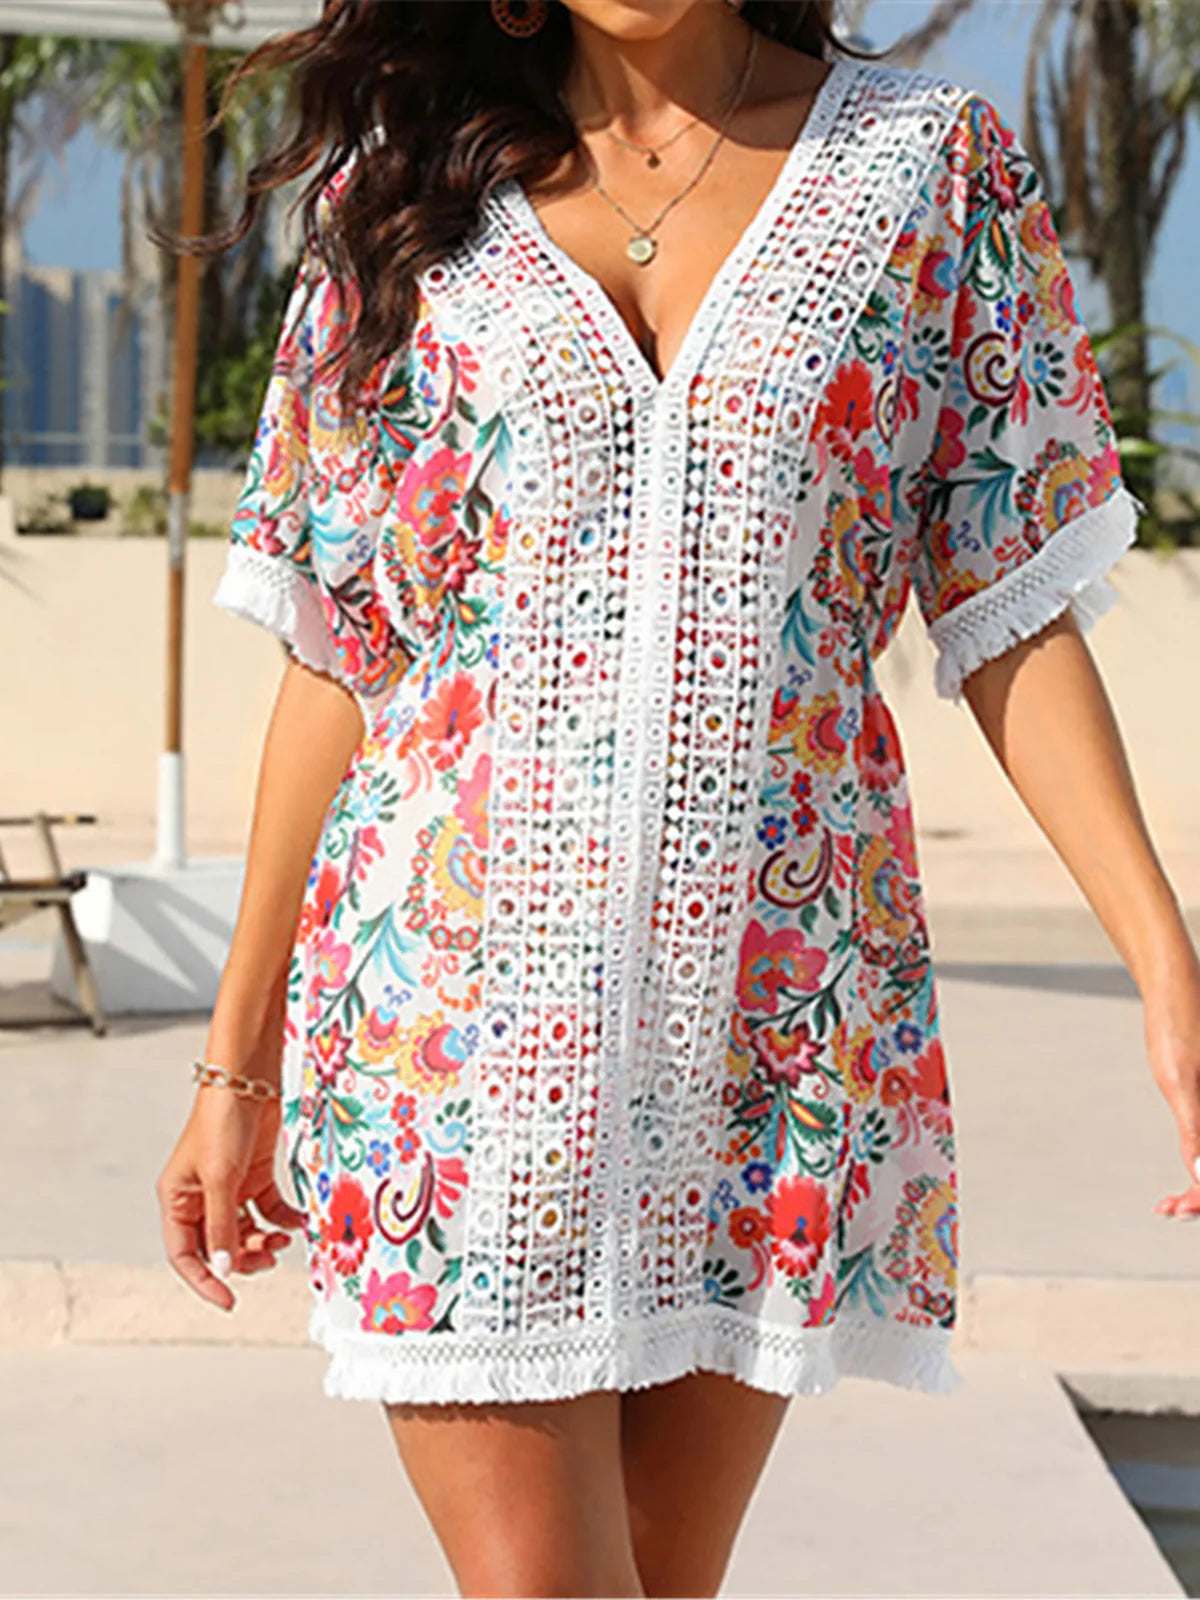 Flowers Printed Floral V-Neck Short Sleeve Tunic, Colorful Beach Cover-Up and Dress with Natural Beauty Design, Made from Nylon, Polyester, and Cotton, Fits True to Size, Ideal for Females, One Size Fits All, Floral Design